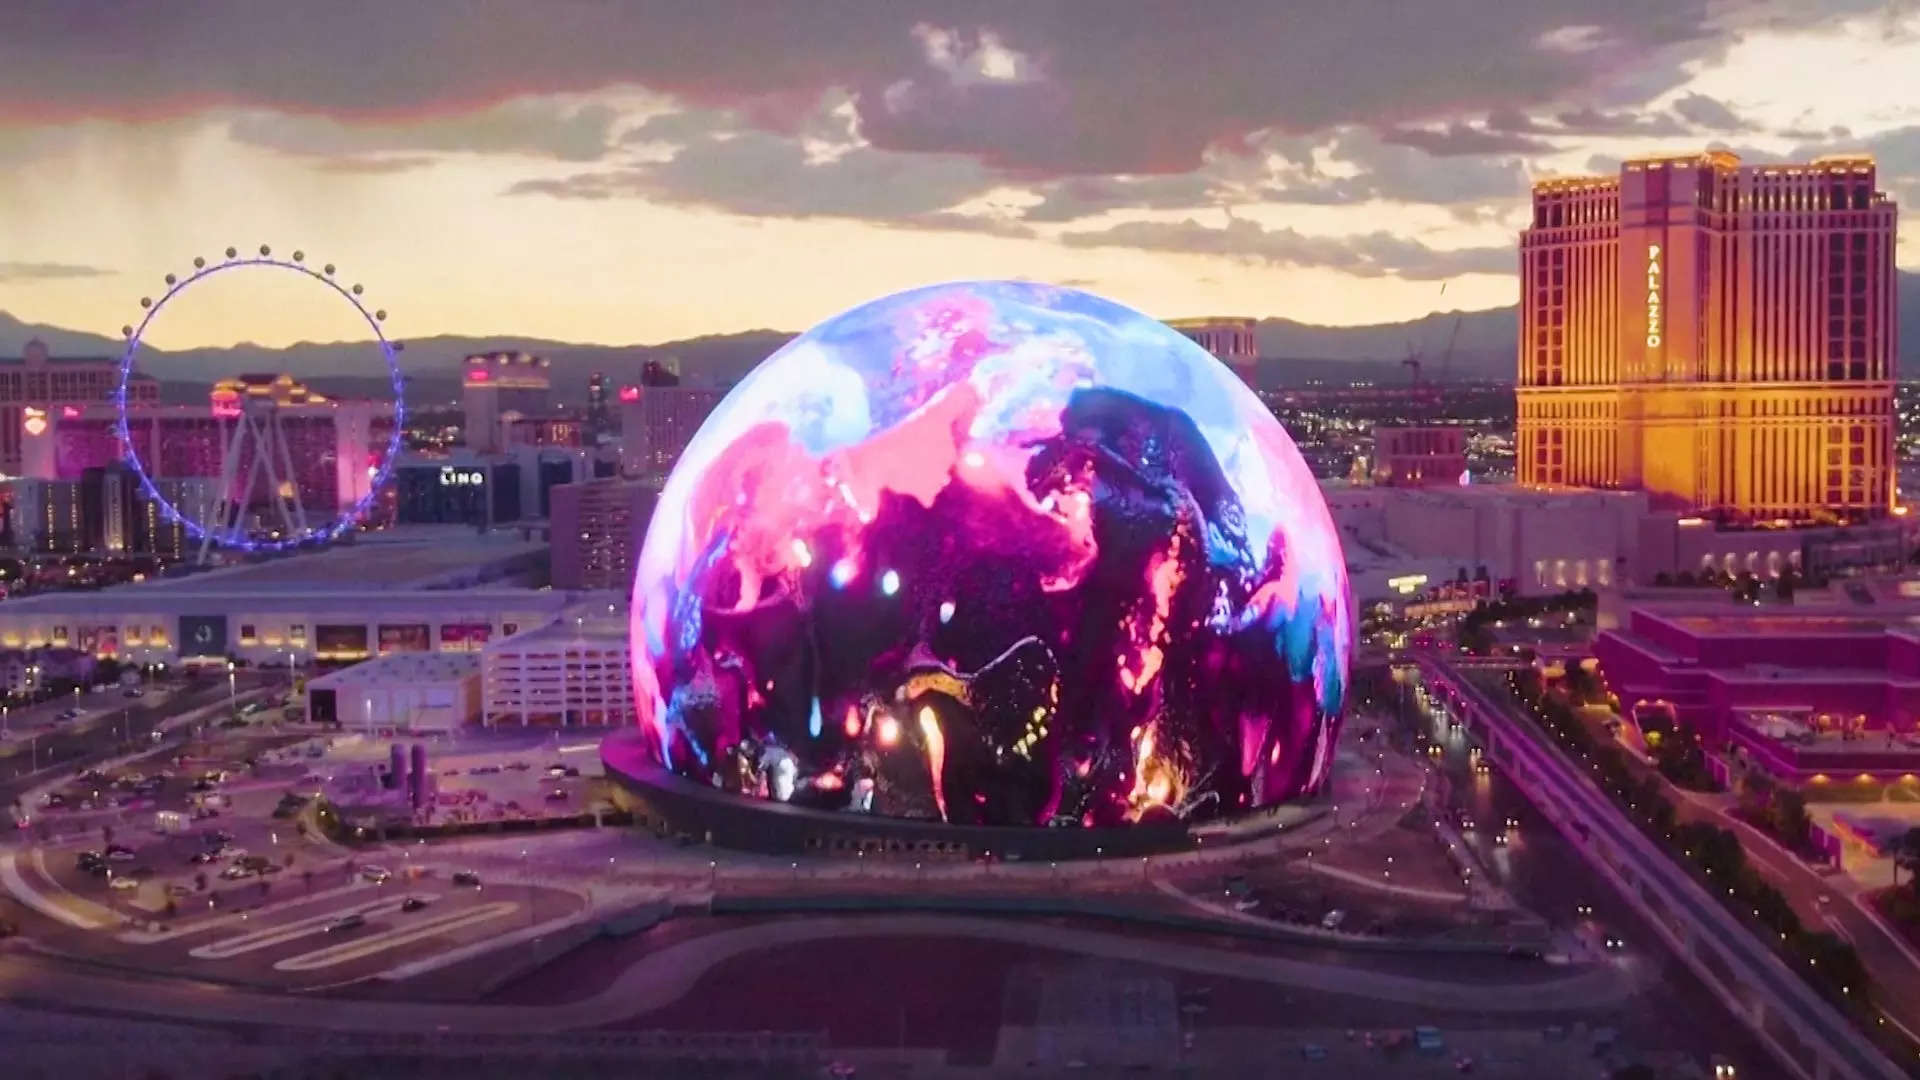 No, London will not be getting its own version of the Vegas Sphere ...